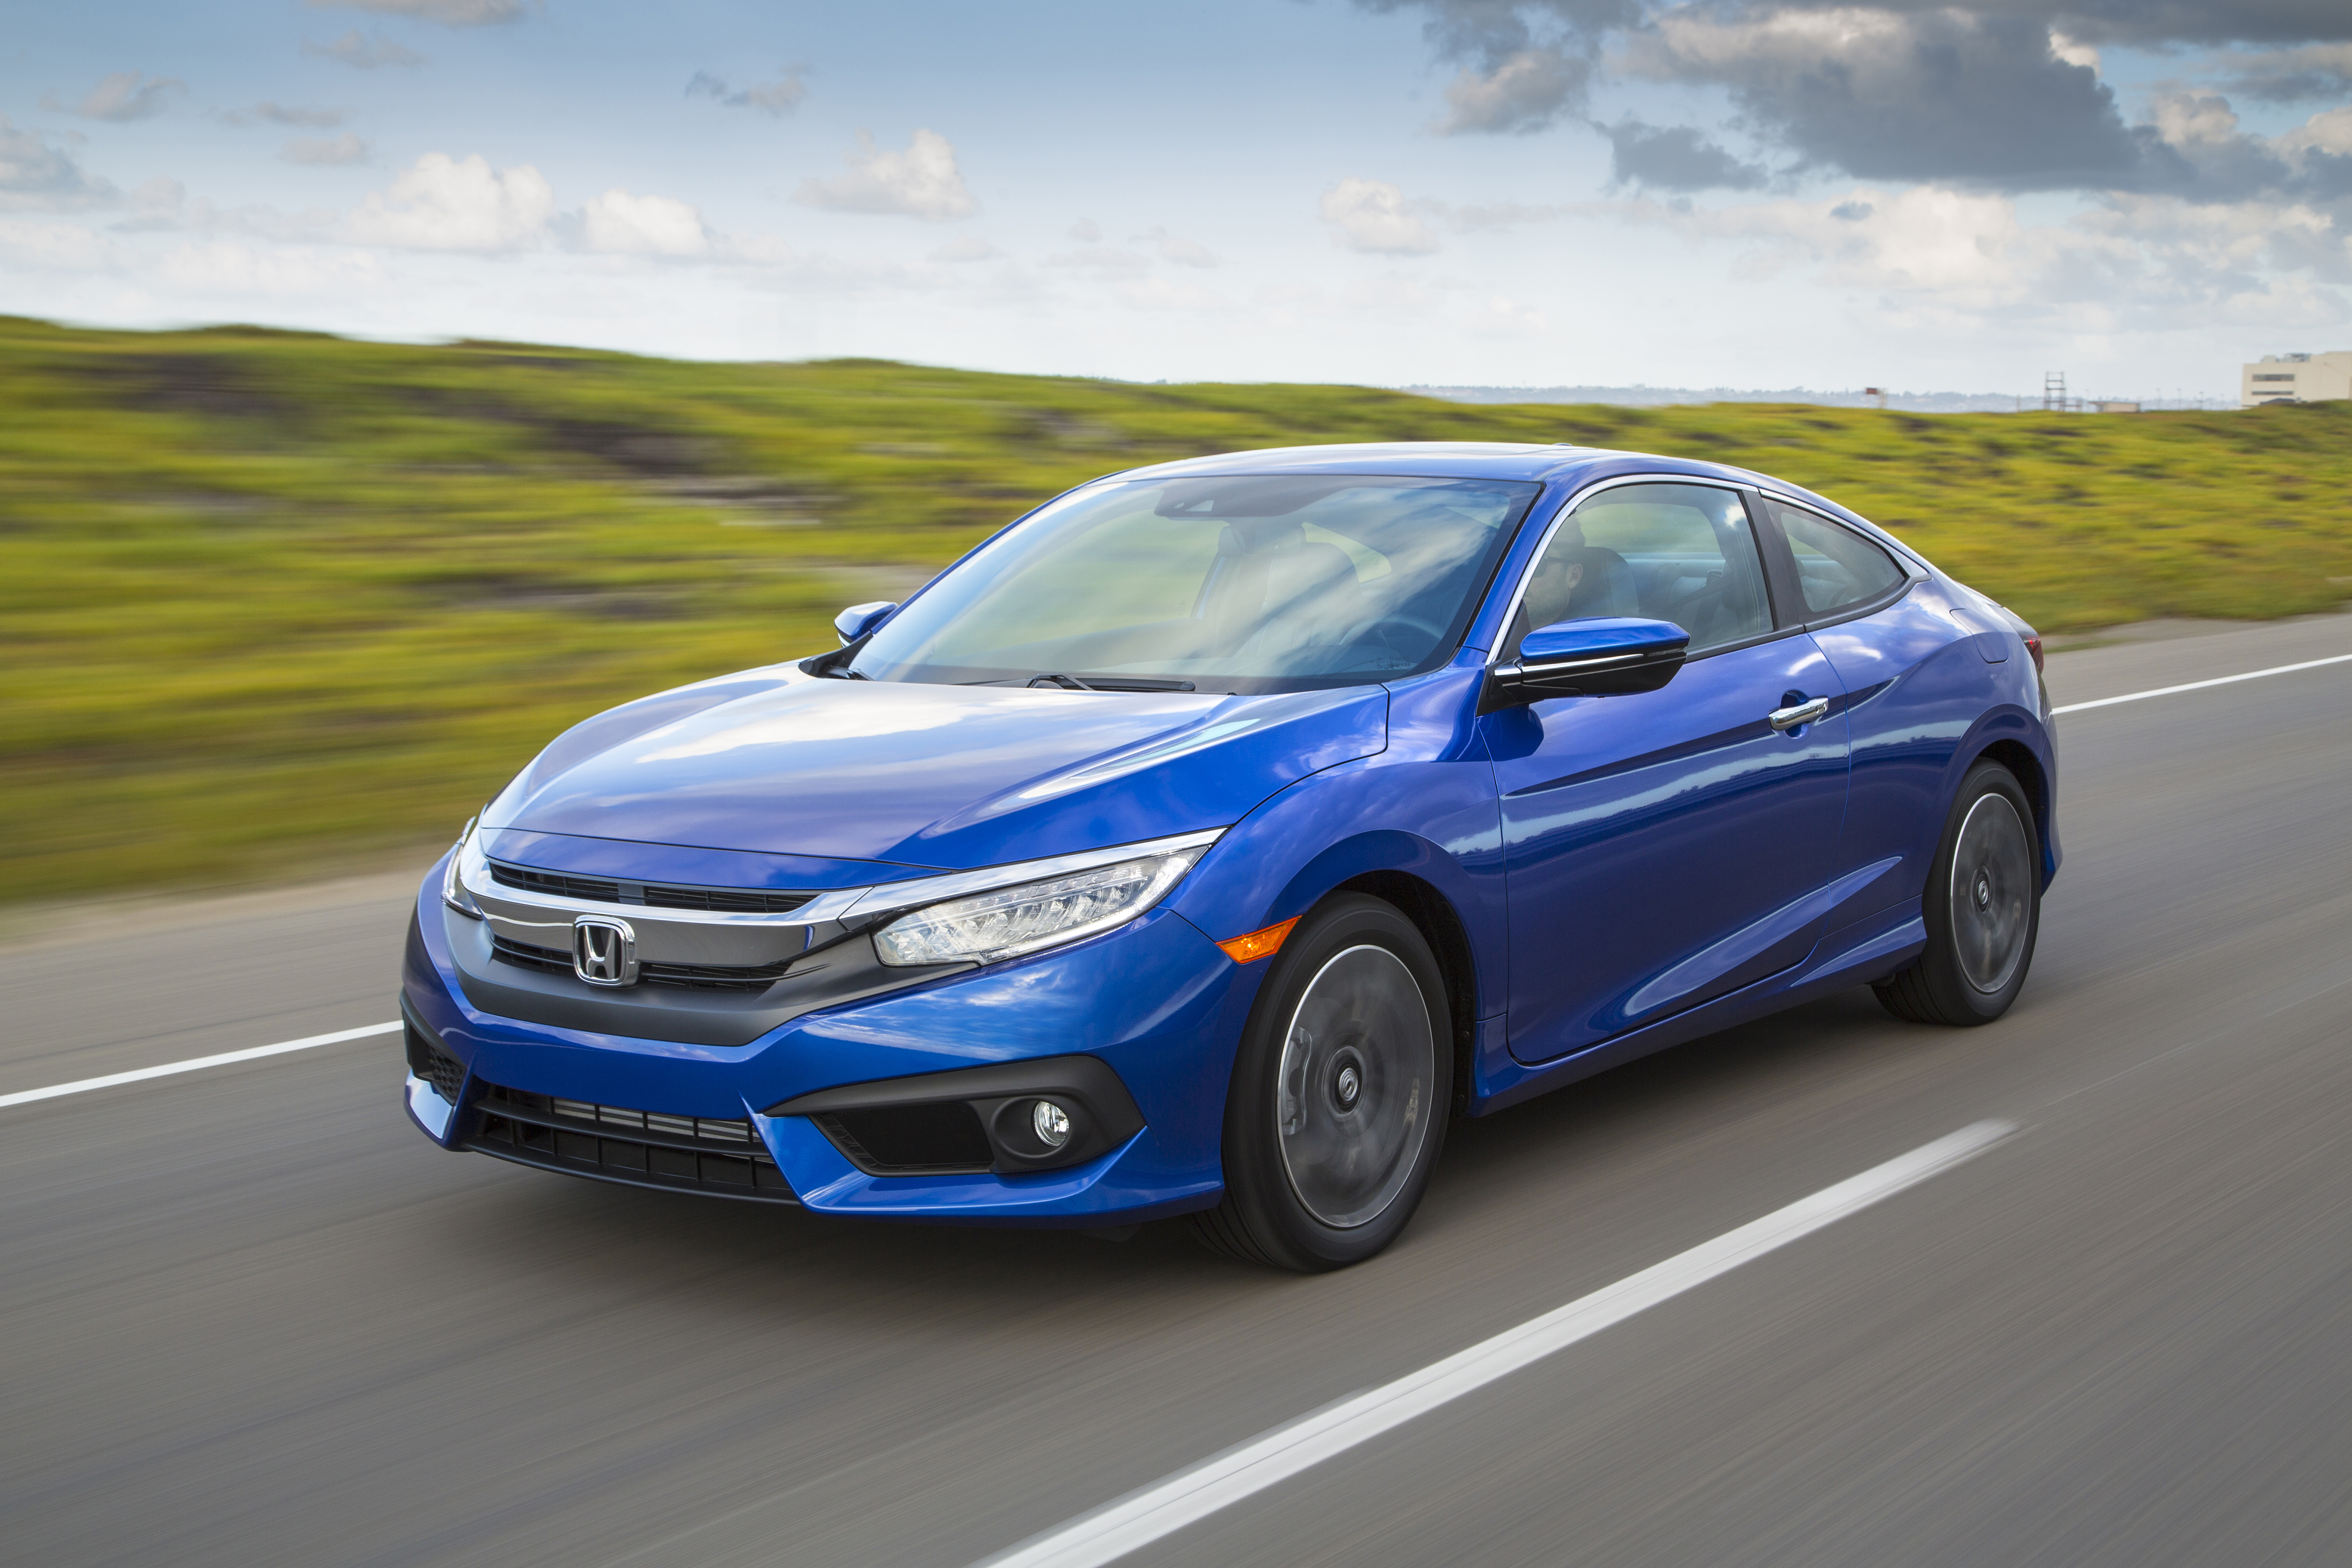 2017 Honda Civic Lineup will feature Turbocharged Engines and Manual